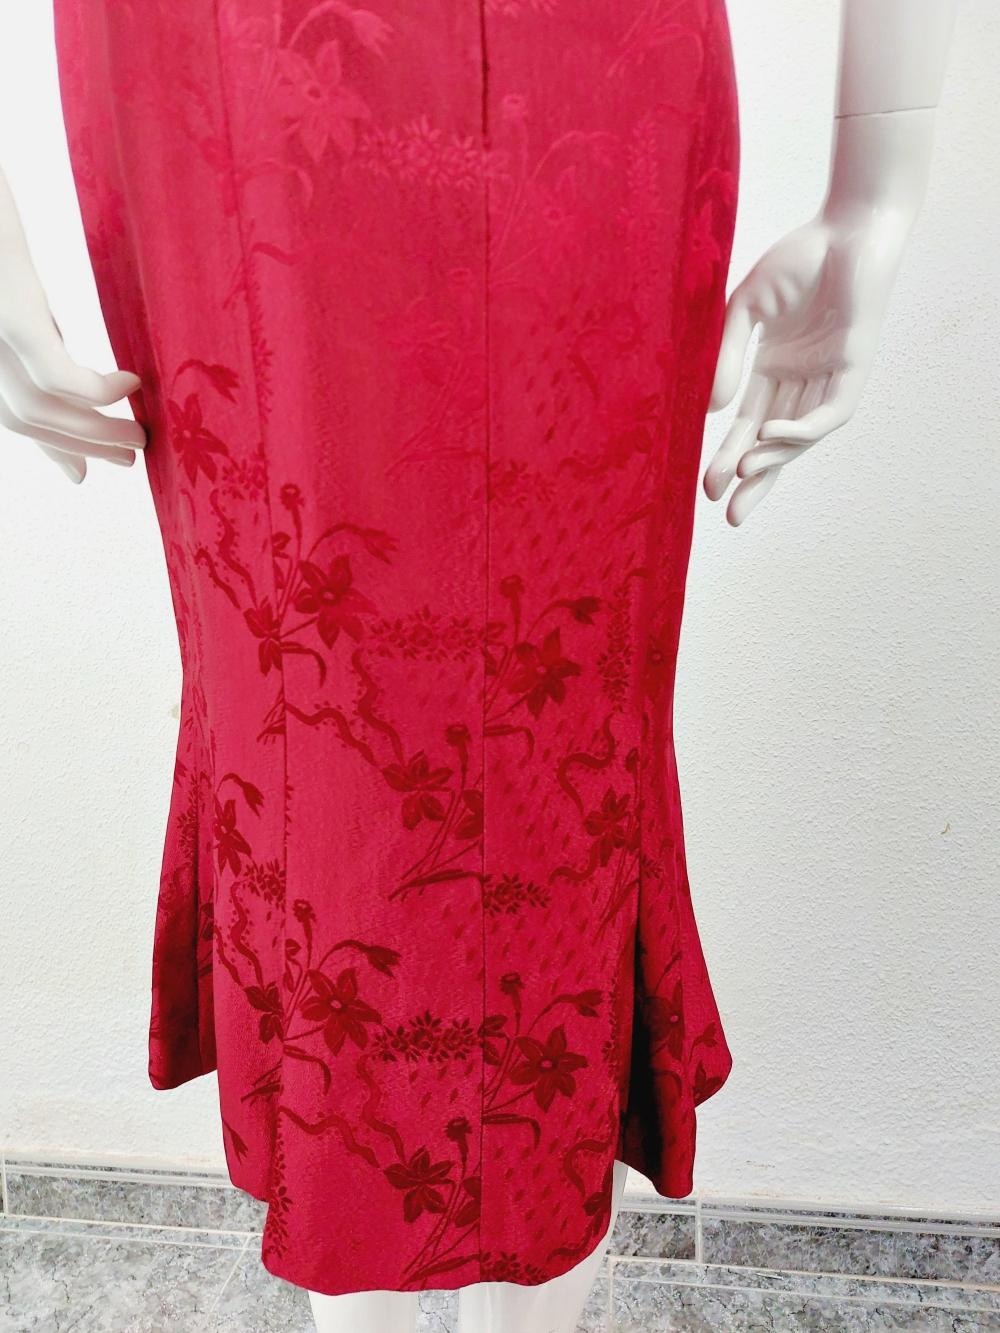 Women's or Men's John Galliano London Red Silk Brocade Floral Runway Evening Gown Dress w Stola For Sale